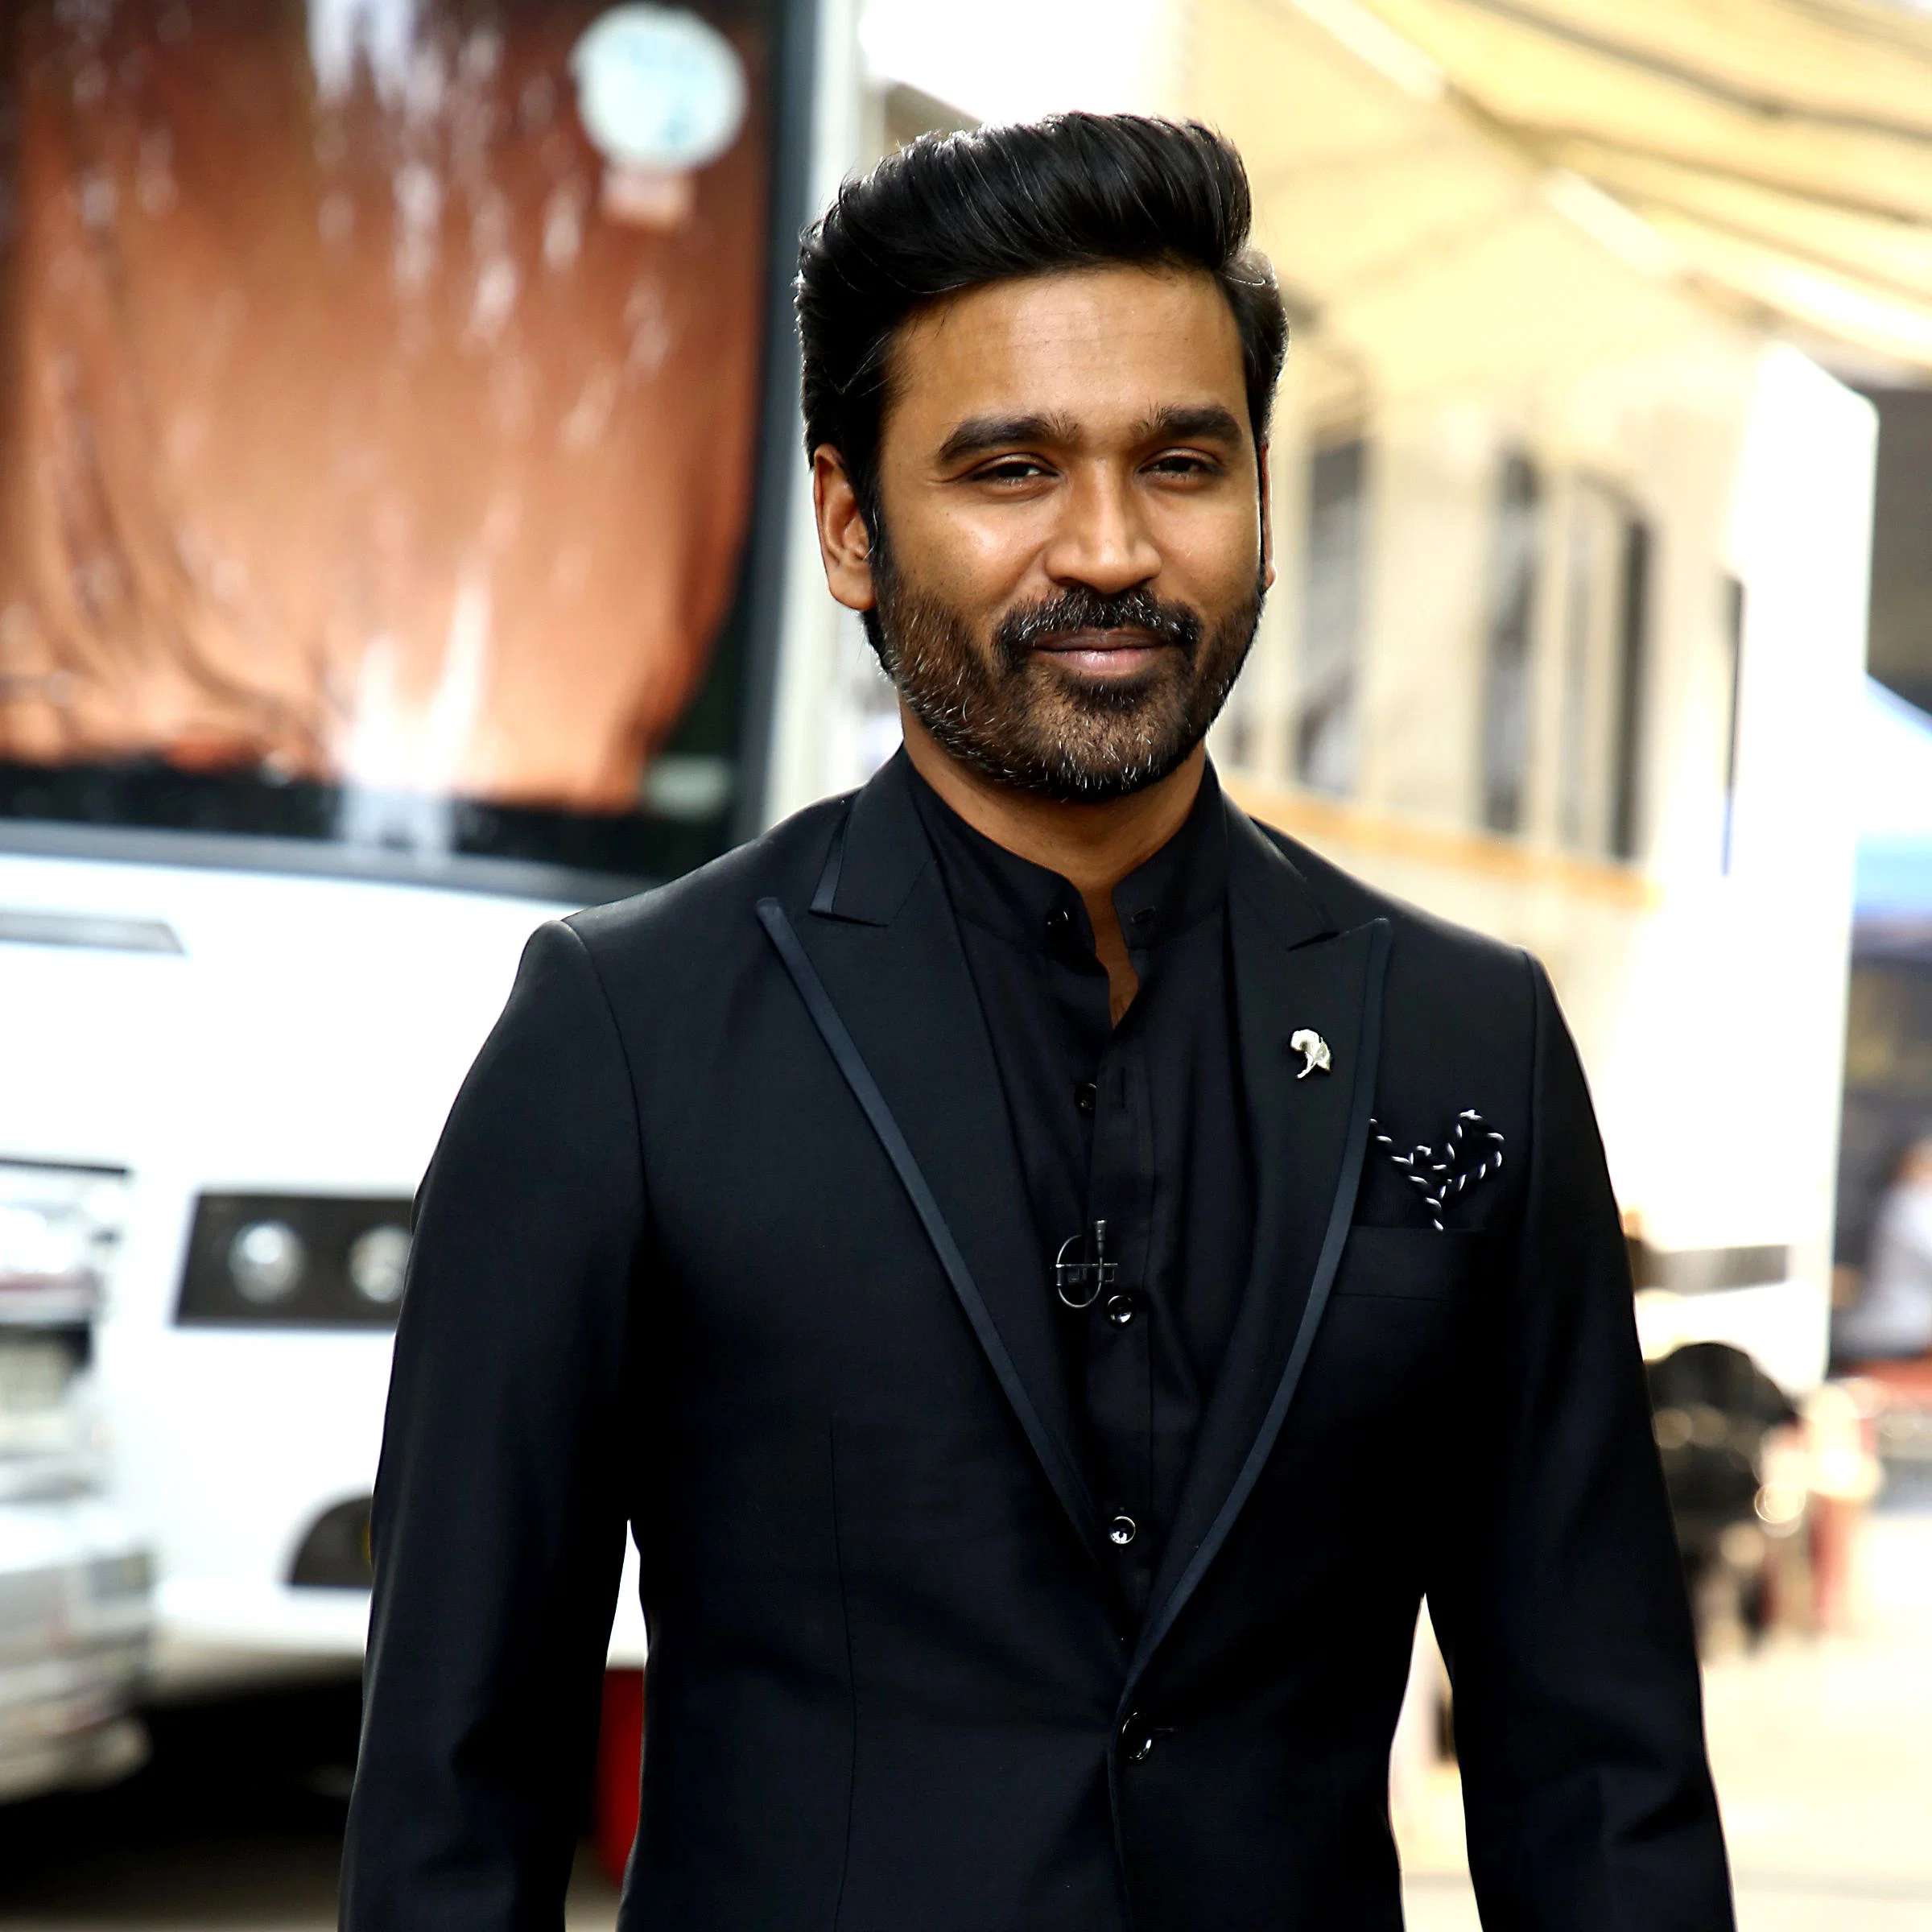 Dhanush playing cricket with his sons photos getting viral